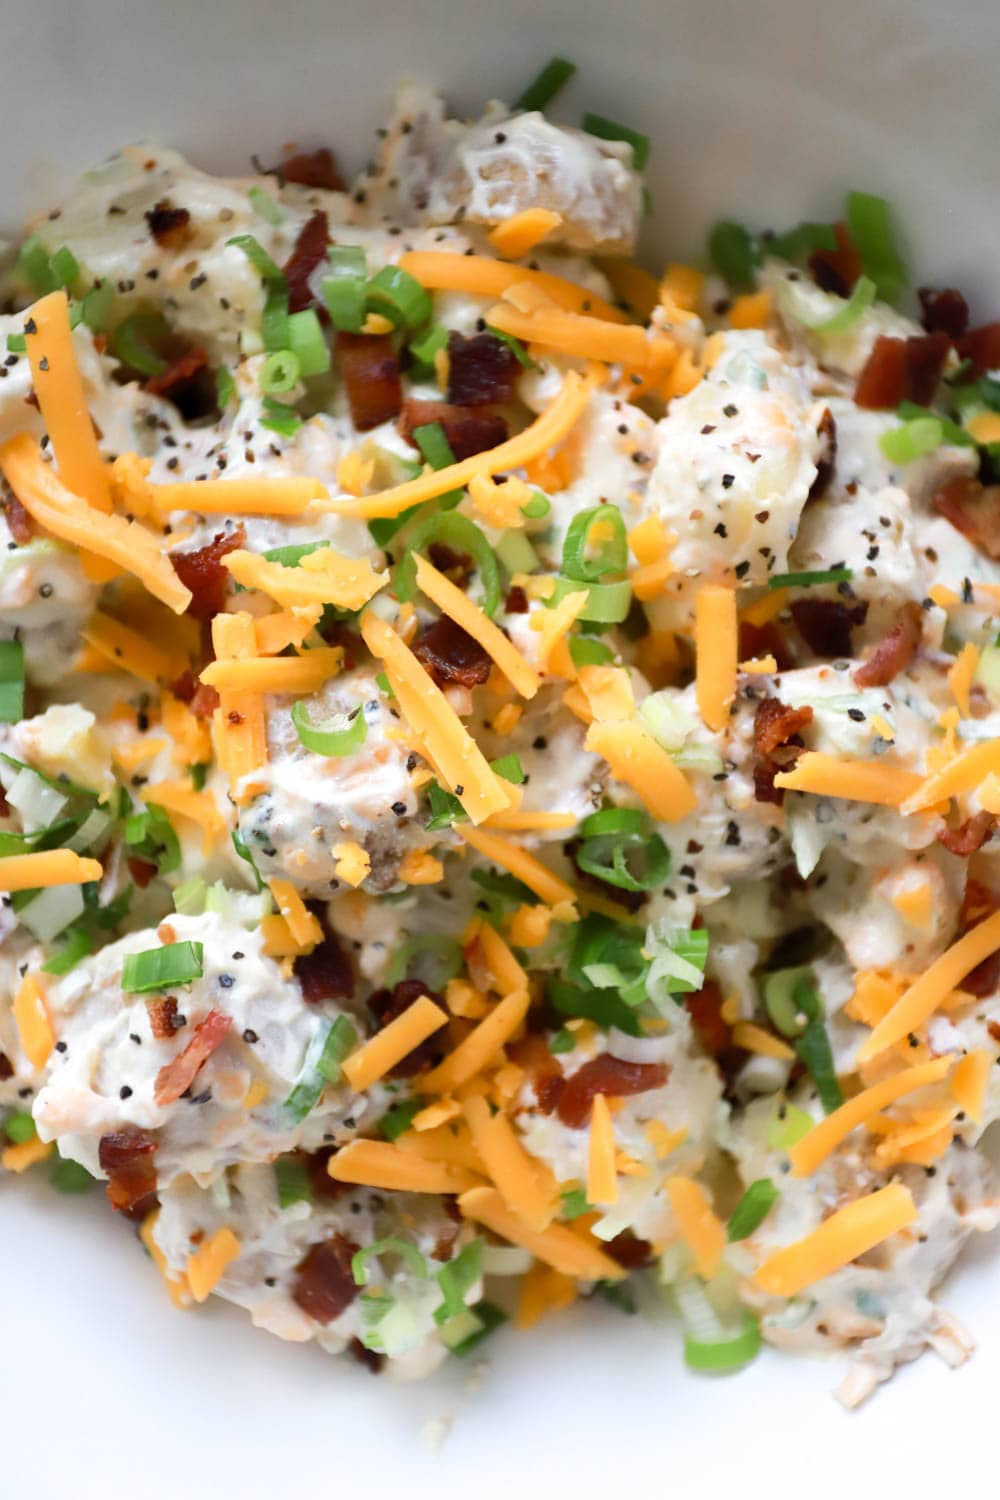 Loaded Baked Potato Salad (for Labor Day!) | FunnyLove